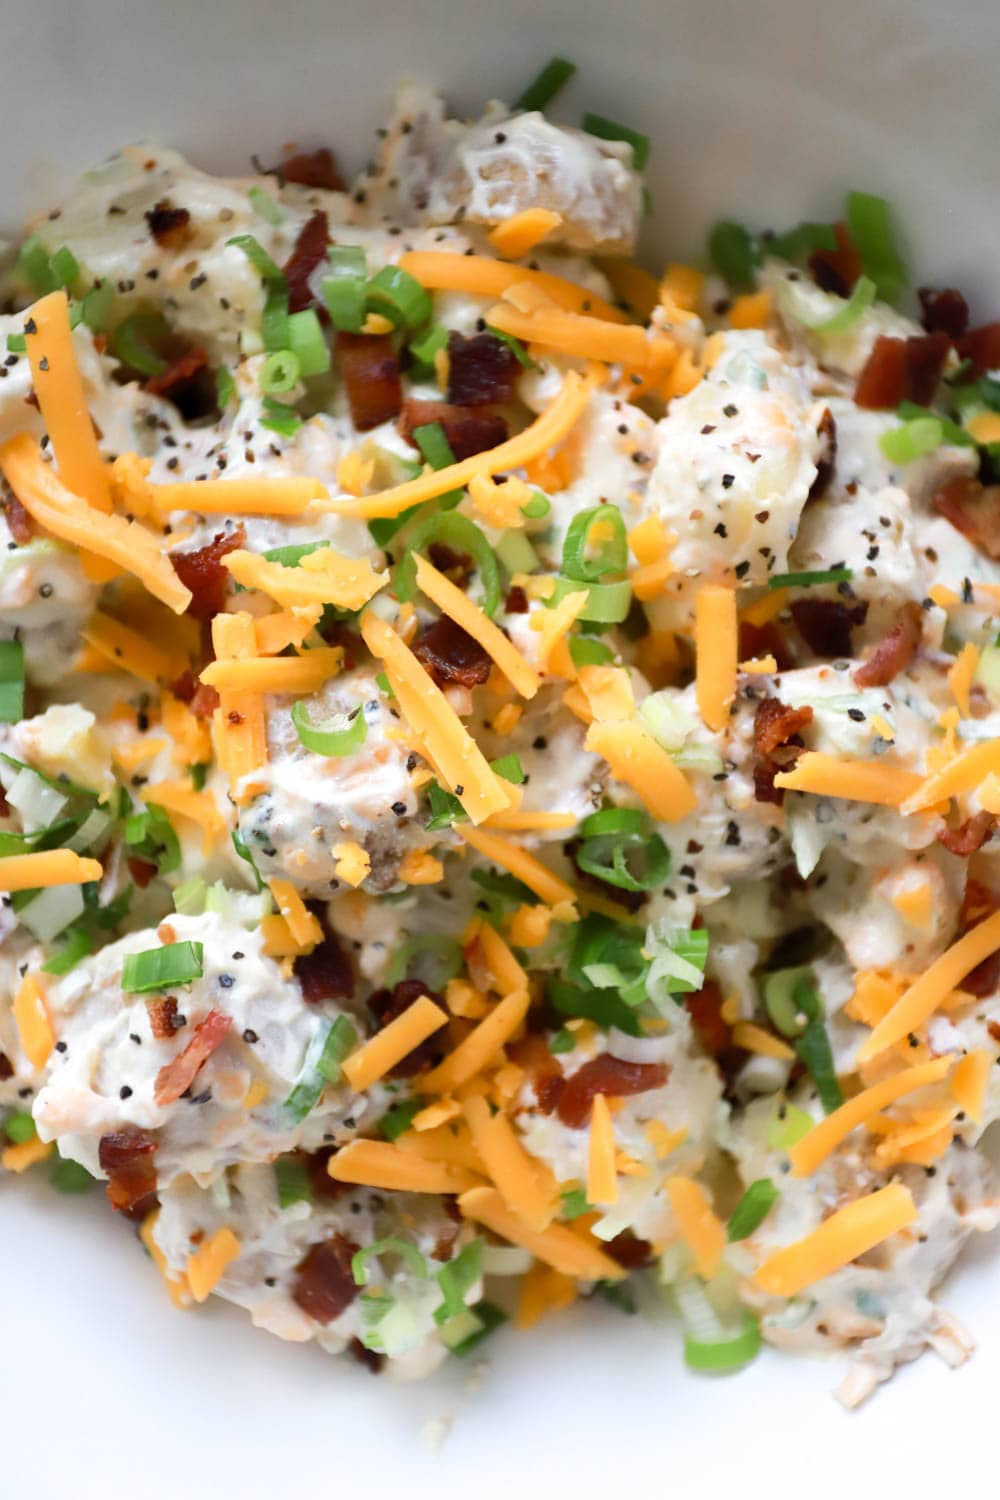 Loaded Baked Potato Salad (for Labor Day!) | FunnyLove